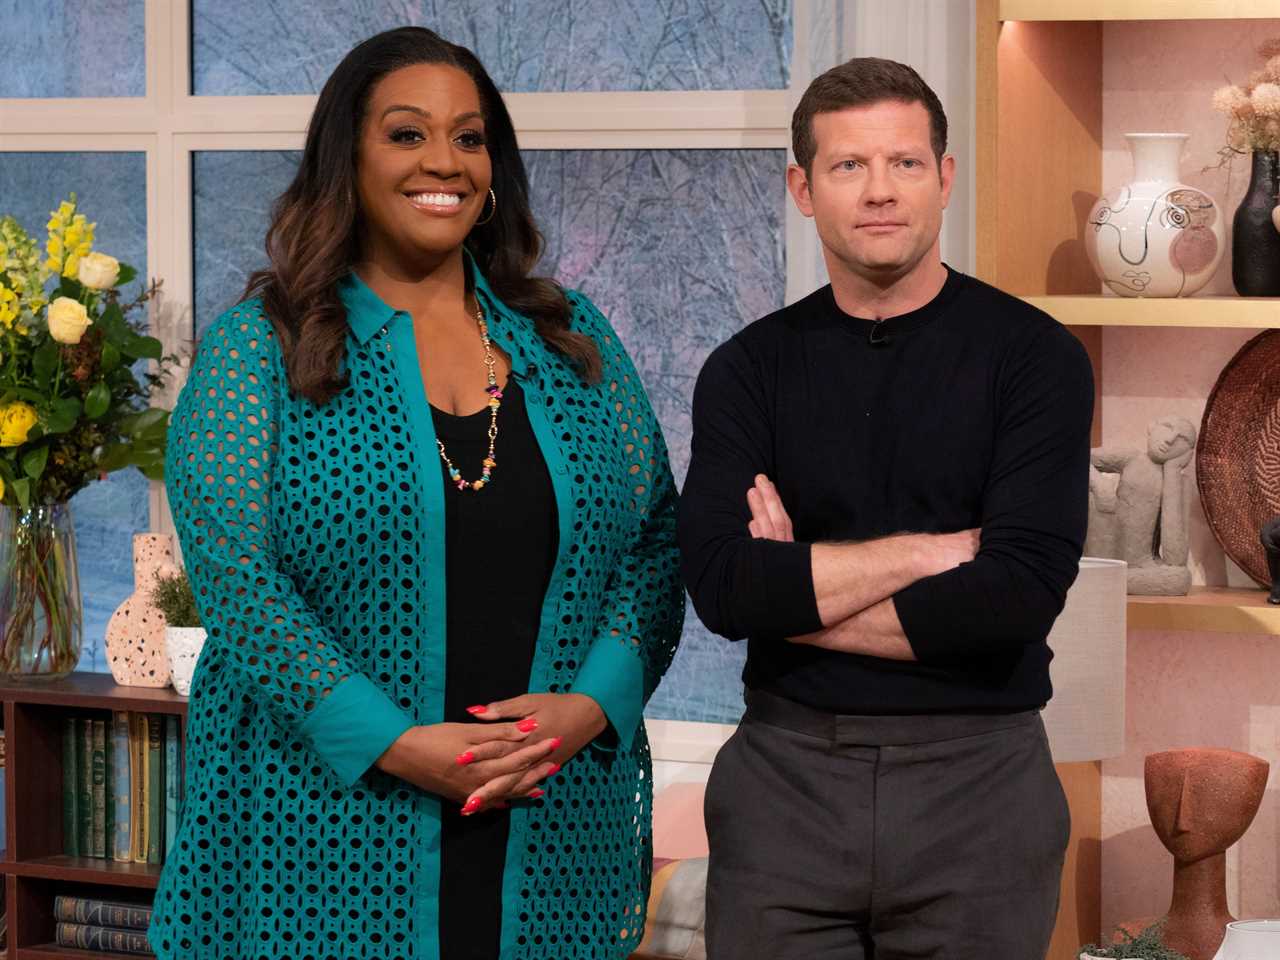 ITV announces huge scheduling shake-up with special episodes of Good Morning Britain, Lorraine and This Morning